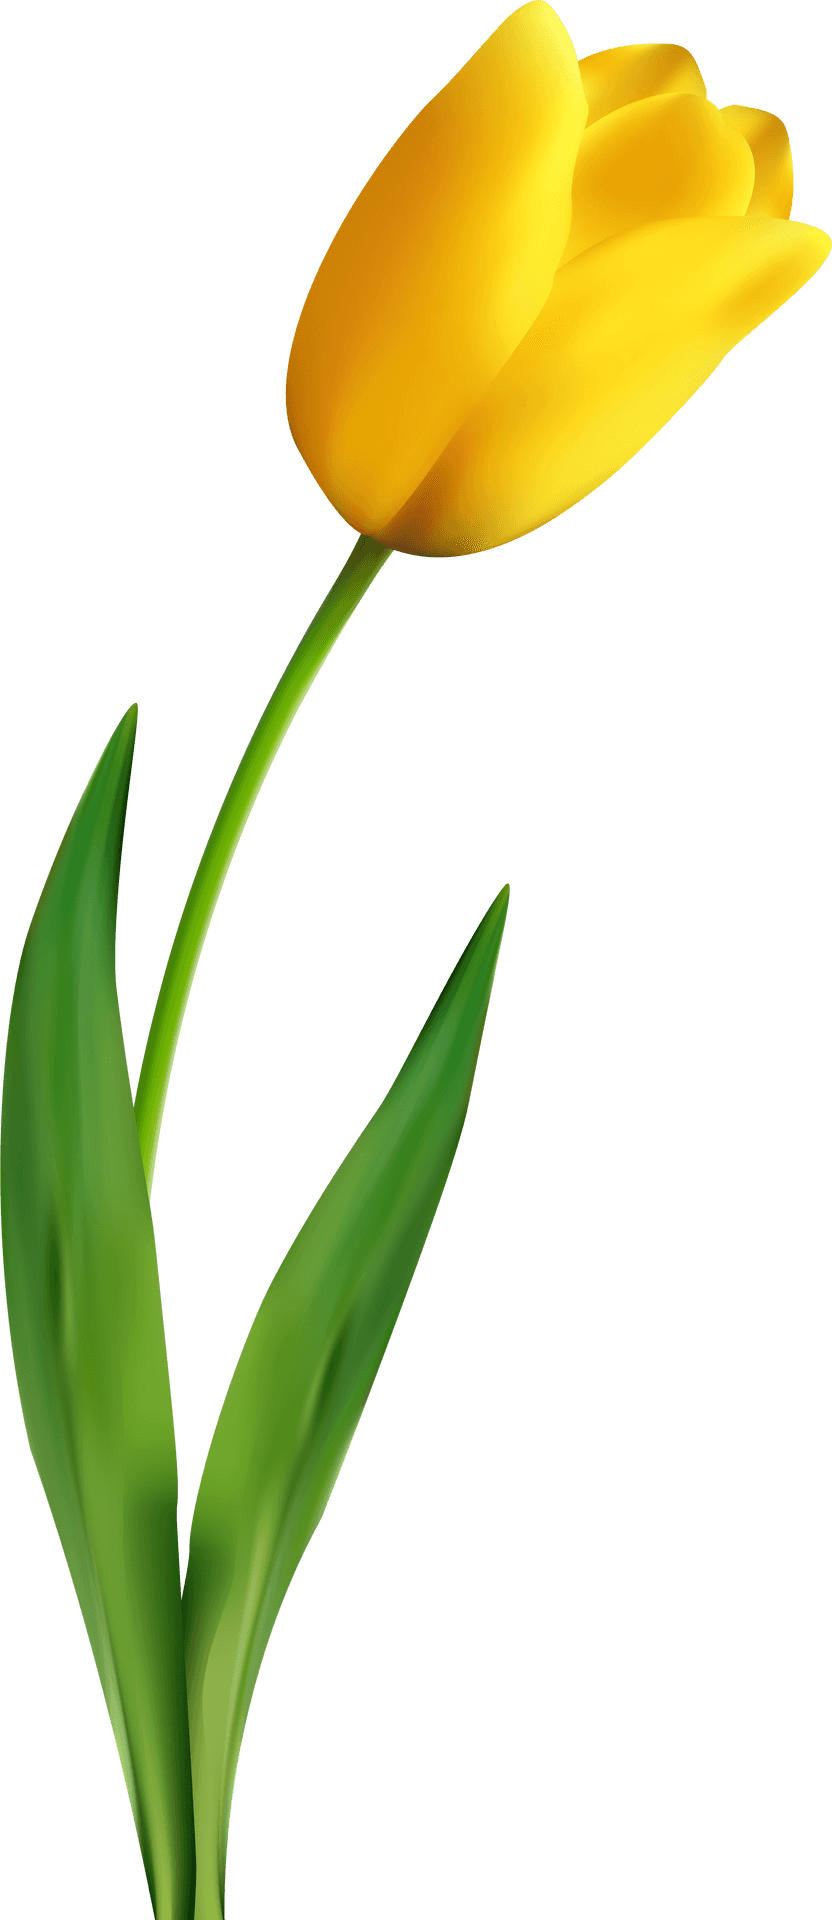 Vibrant Yellow Tulip Flower PNG image